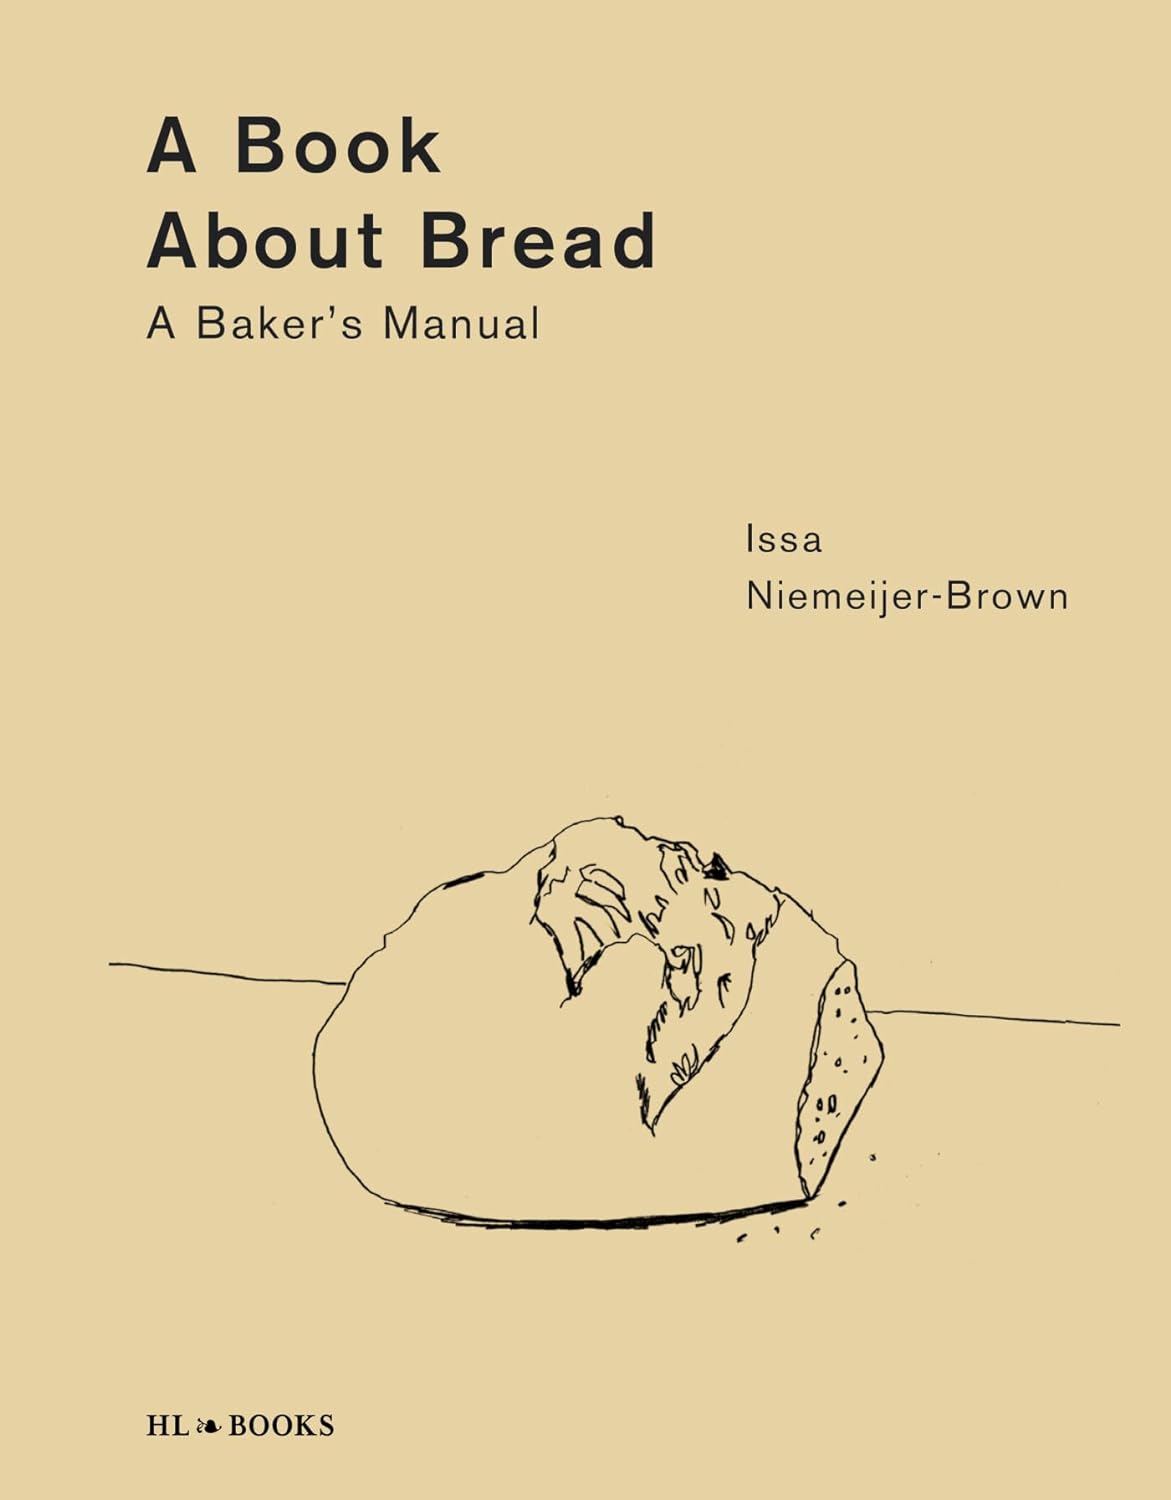 A Book about Bread: A Baker’s Manual (Issa Niemeijer-Brown)